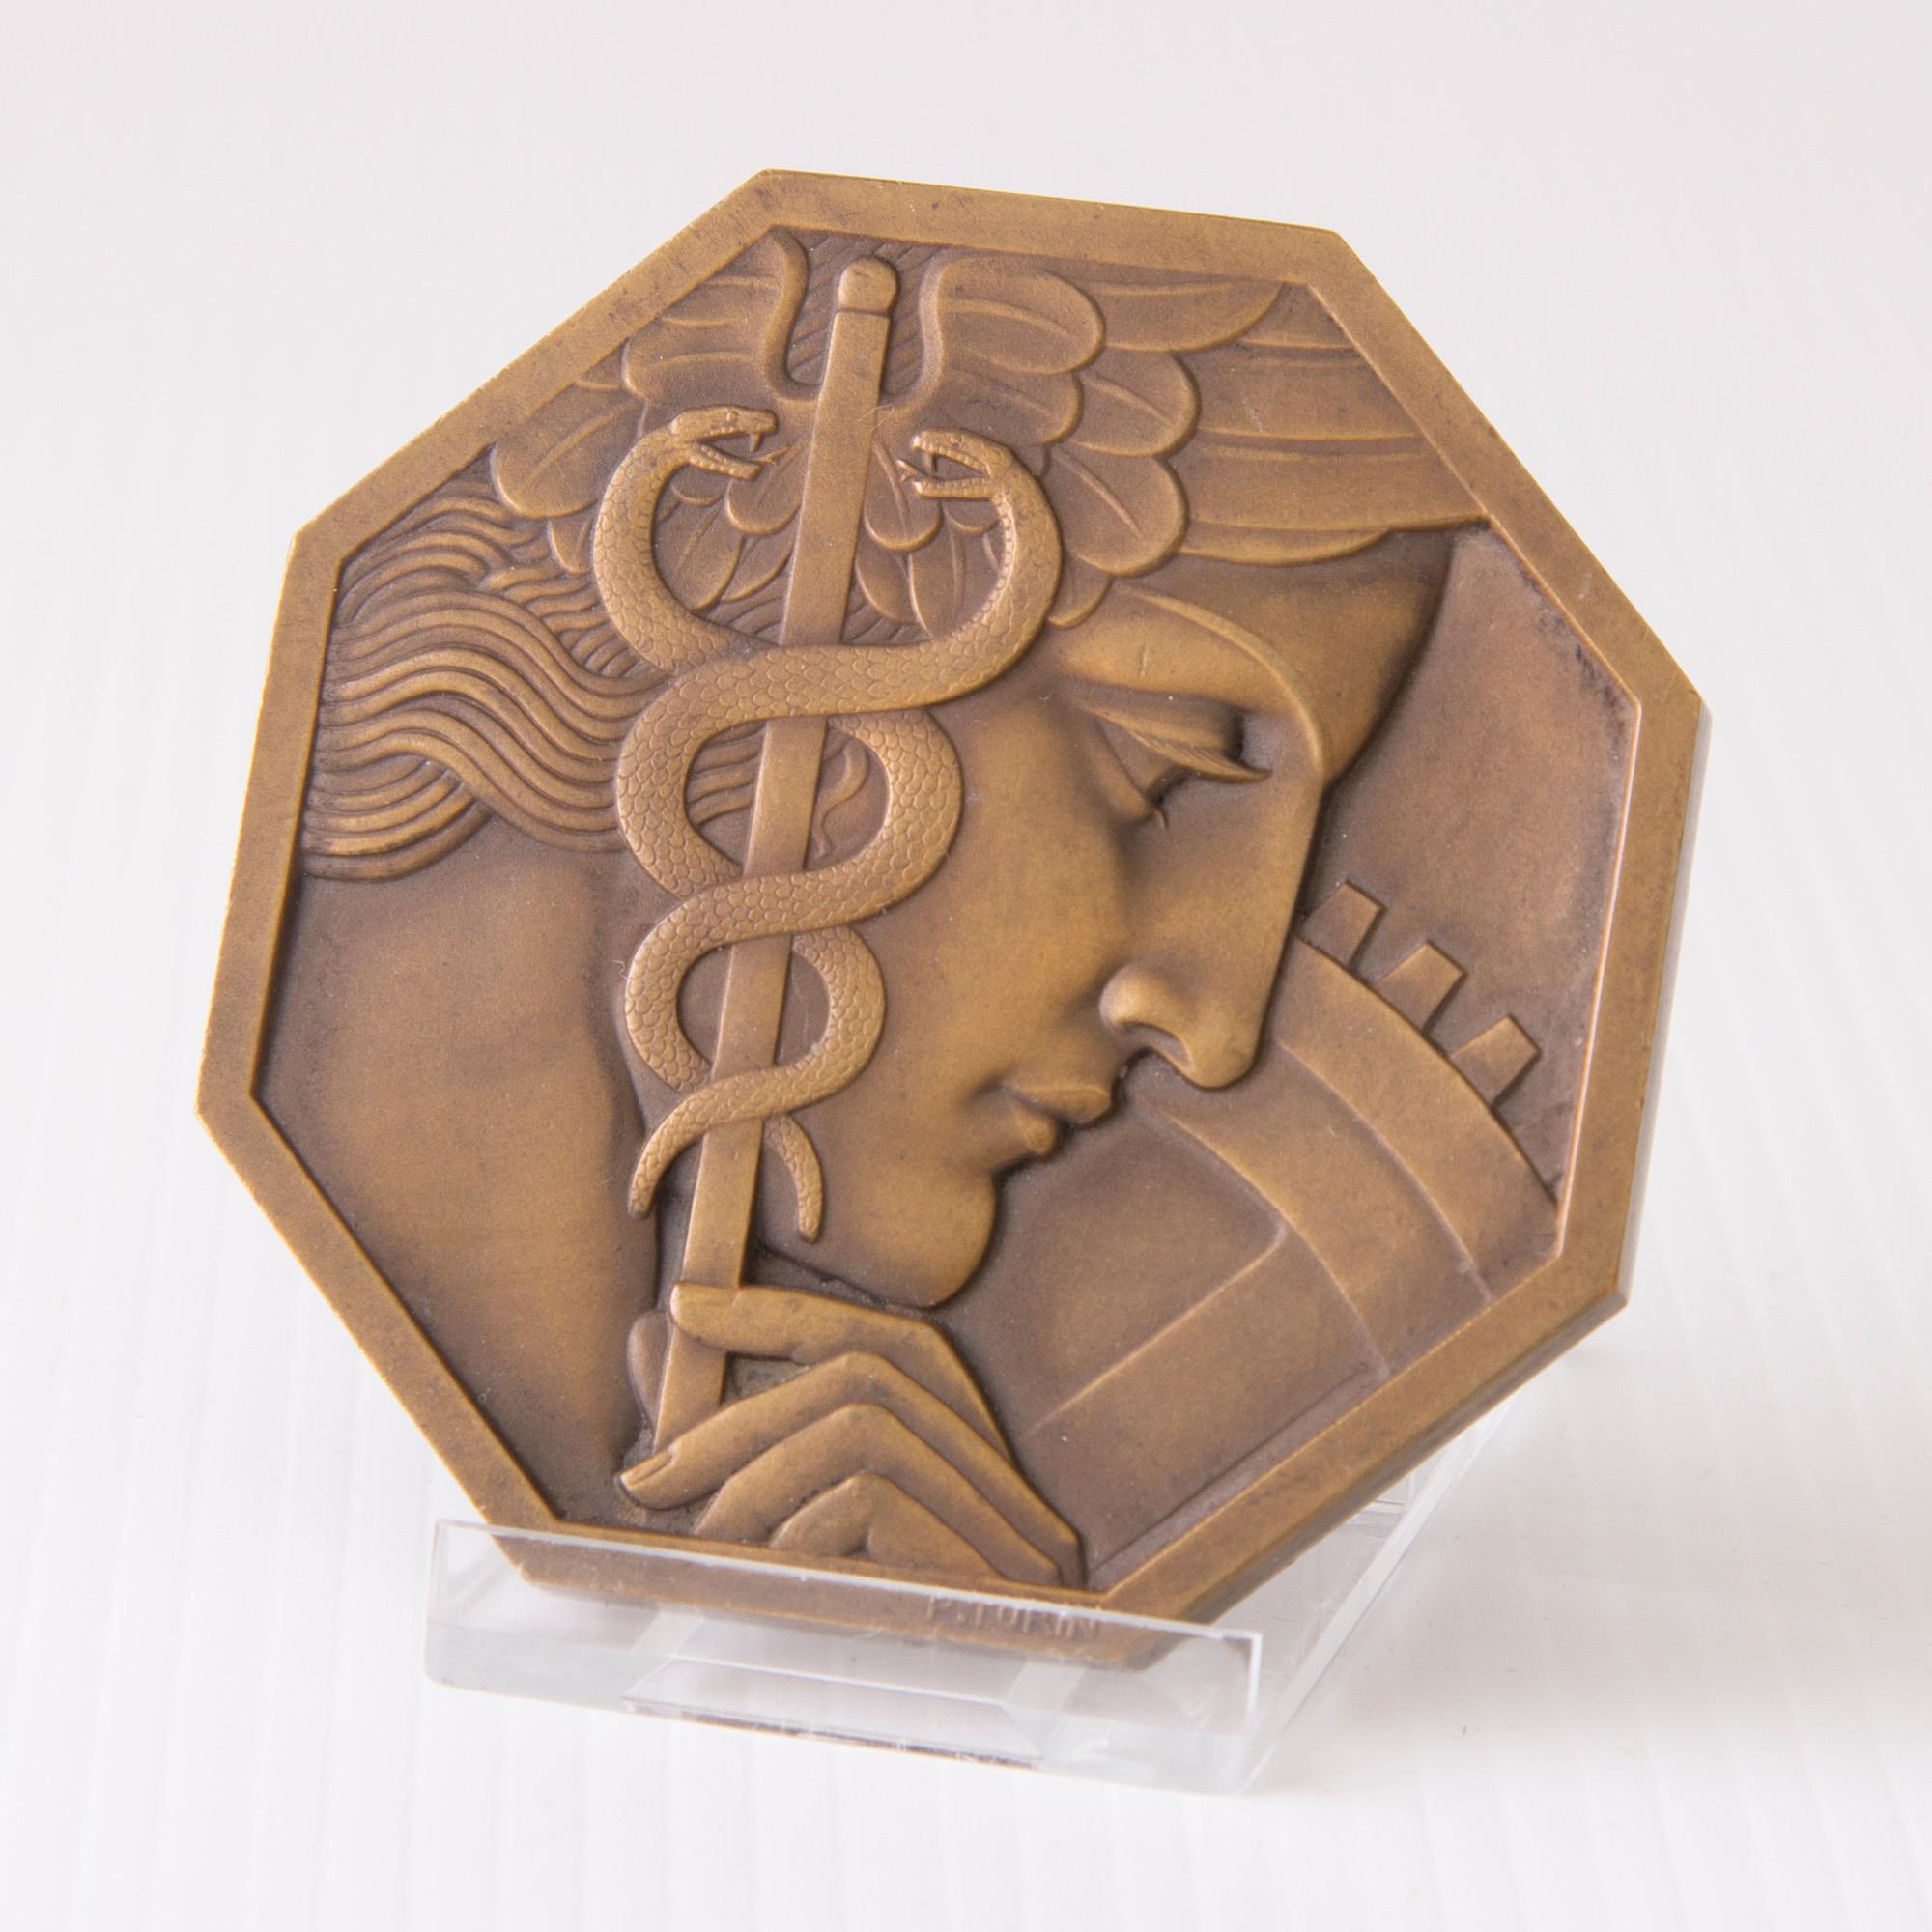 Art Deco bronze medal comite français des expositions,
Designed by Pierre Turin.
Measures: H 7 cm, W 7 cm, D 1 cm
French, circa 1930
In this powerful octagonal medal and Art Deco design Turin’s imagery combines the god Mercury, perhaps as an